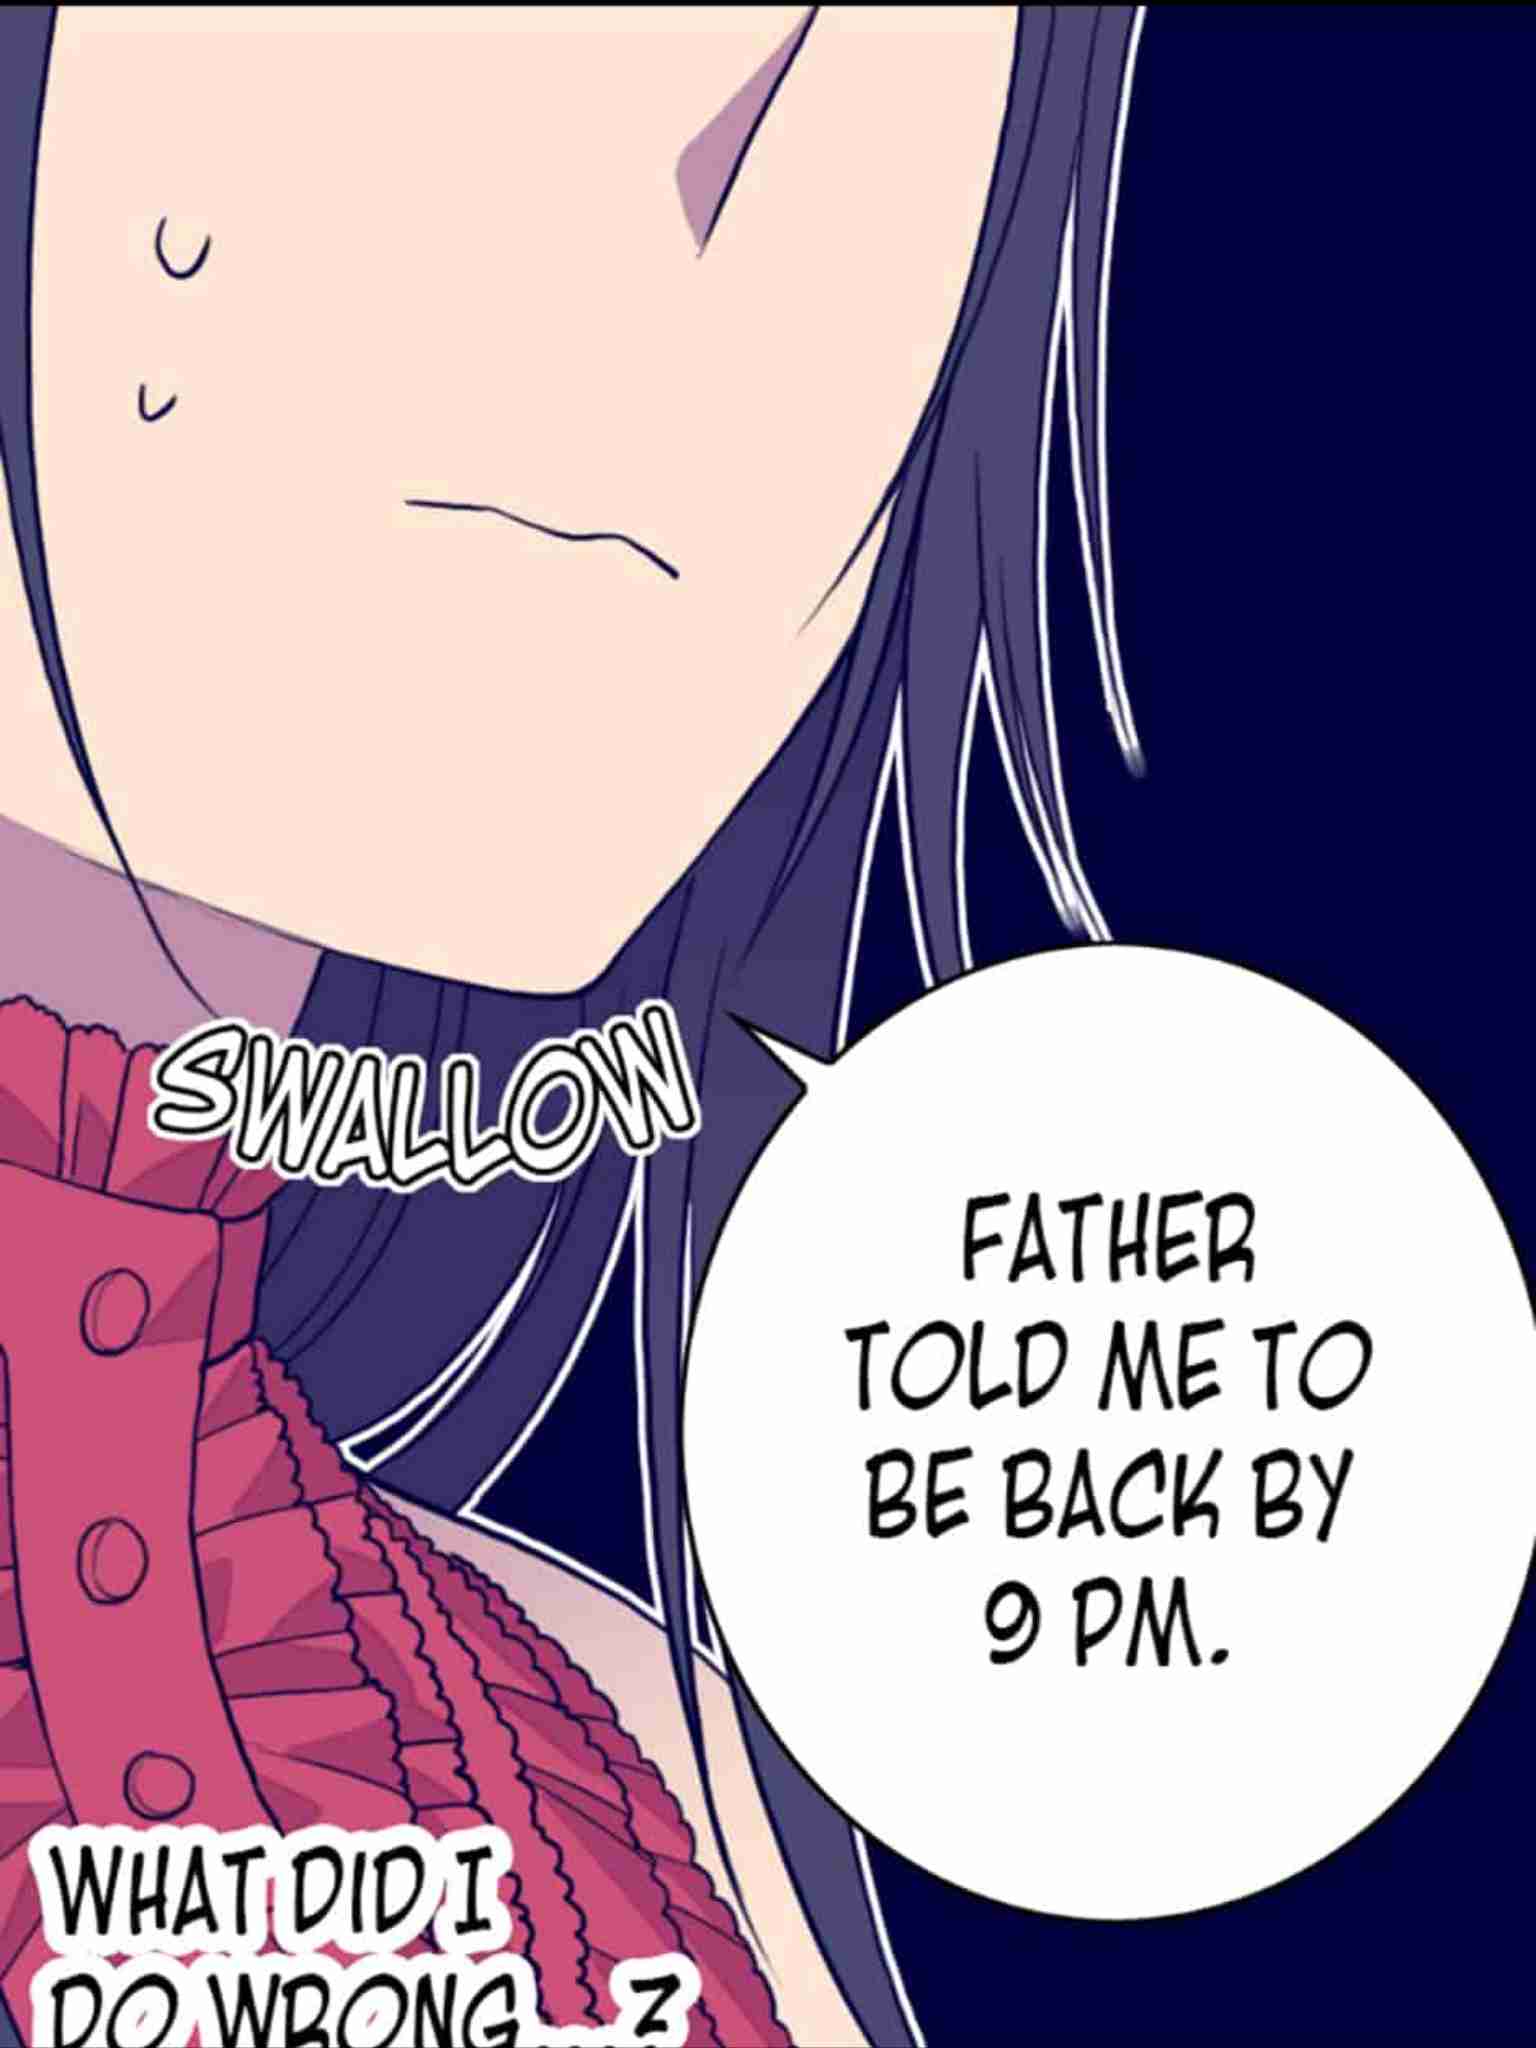 They Say I Was Born a King's Daughter Vol.1 Ch.25